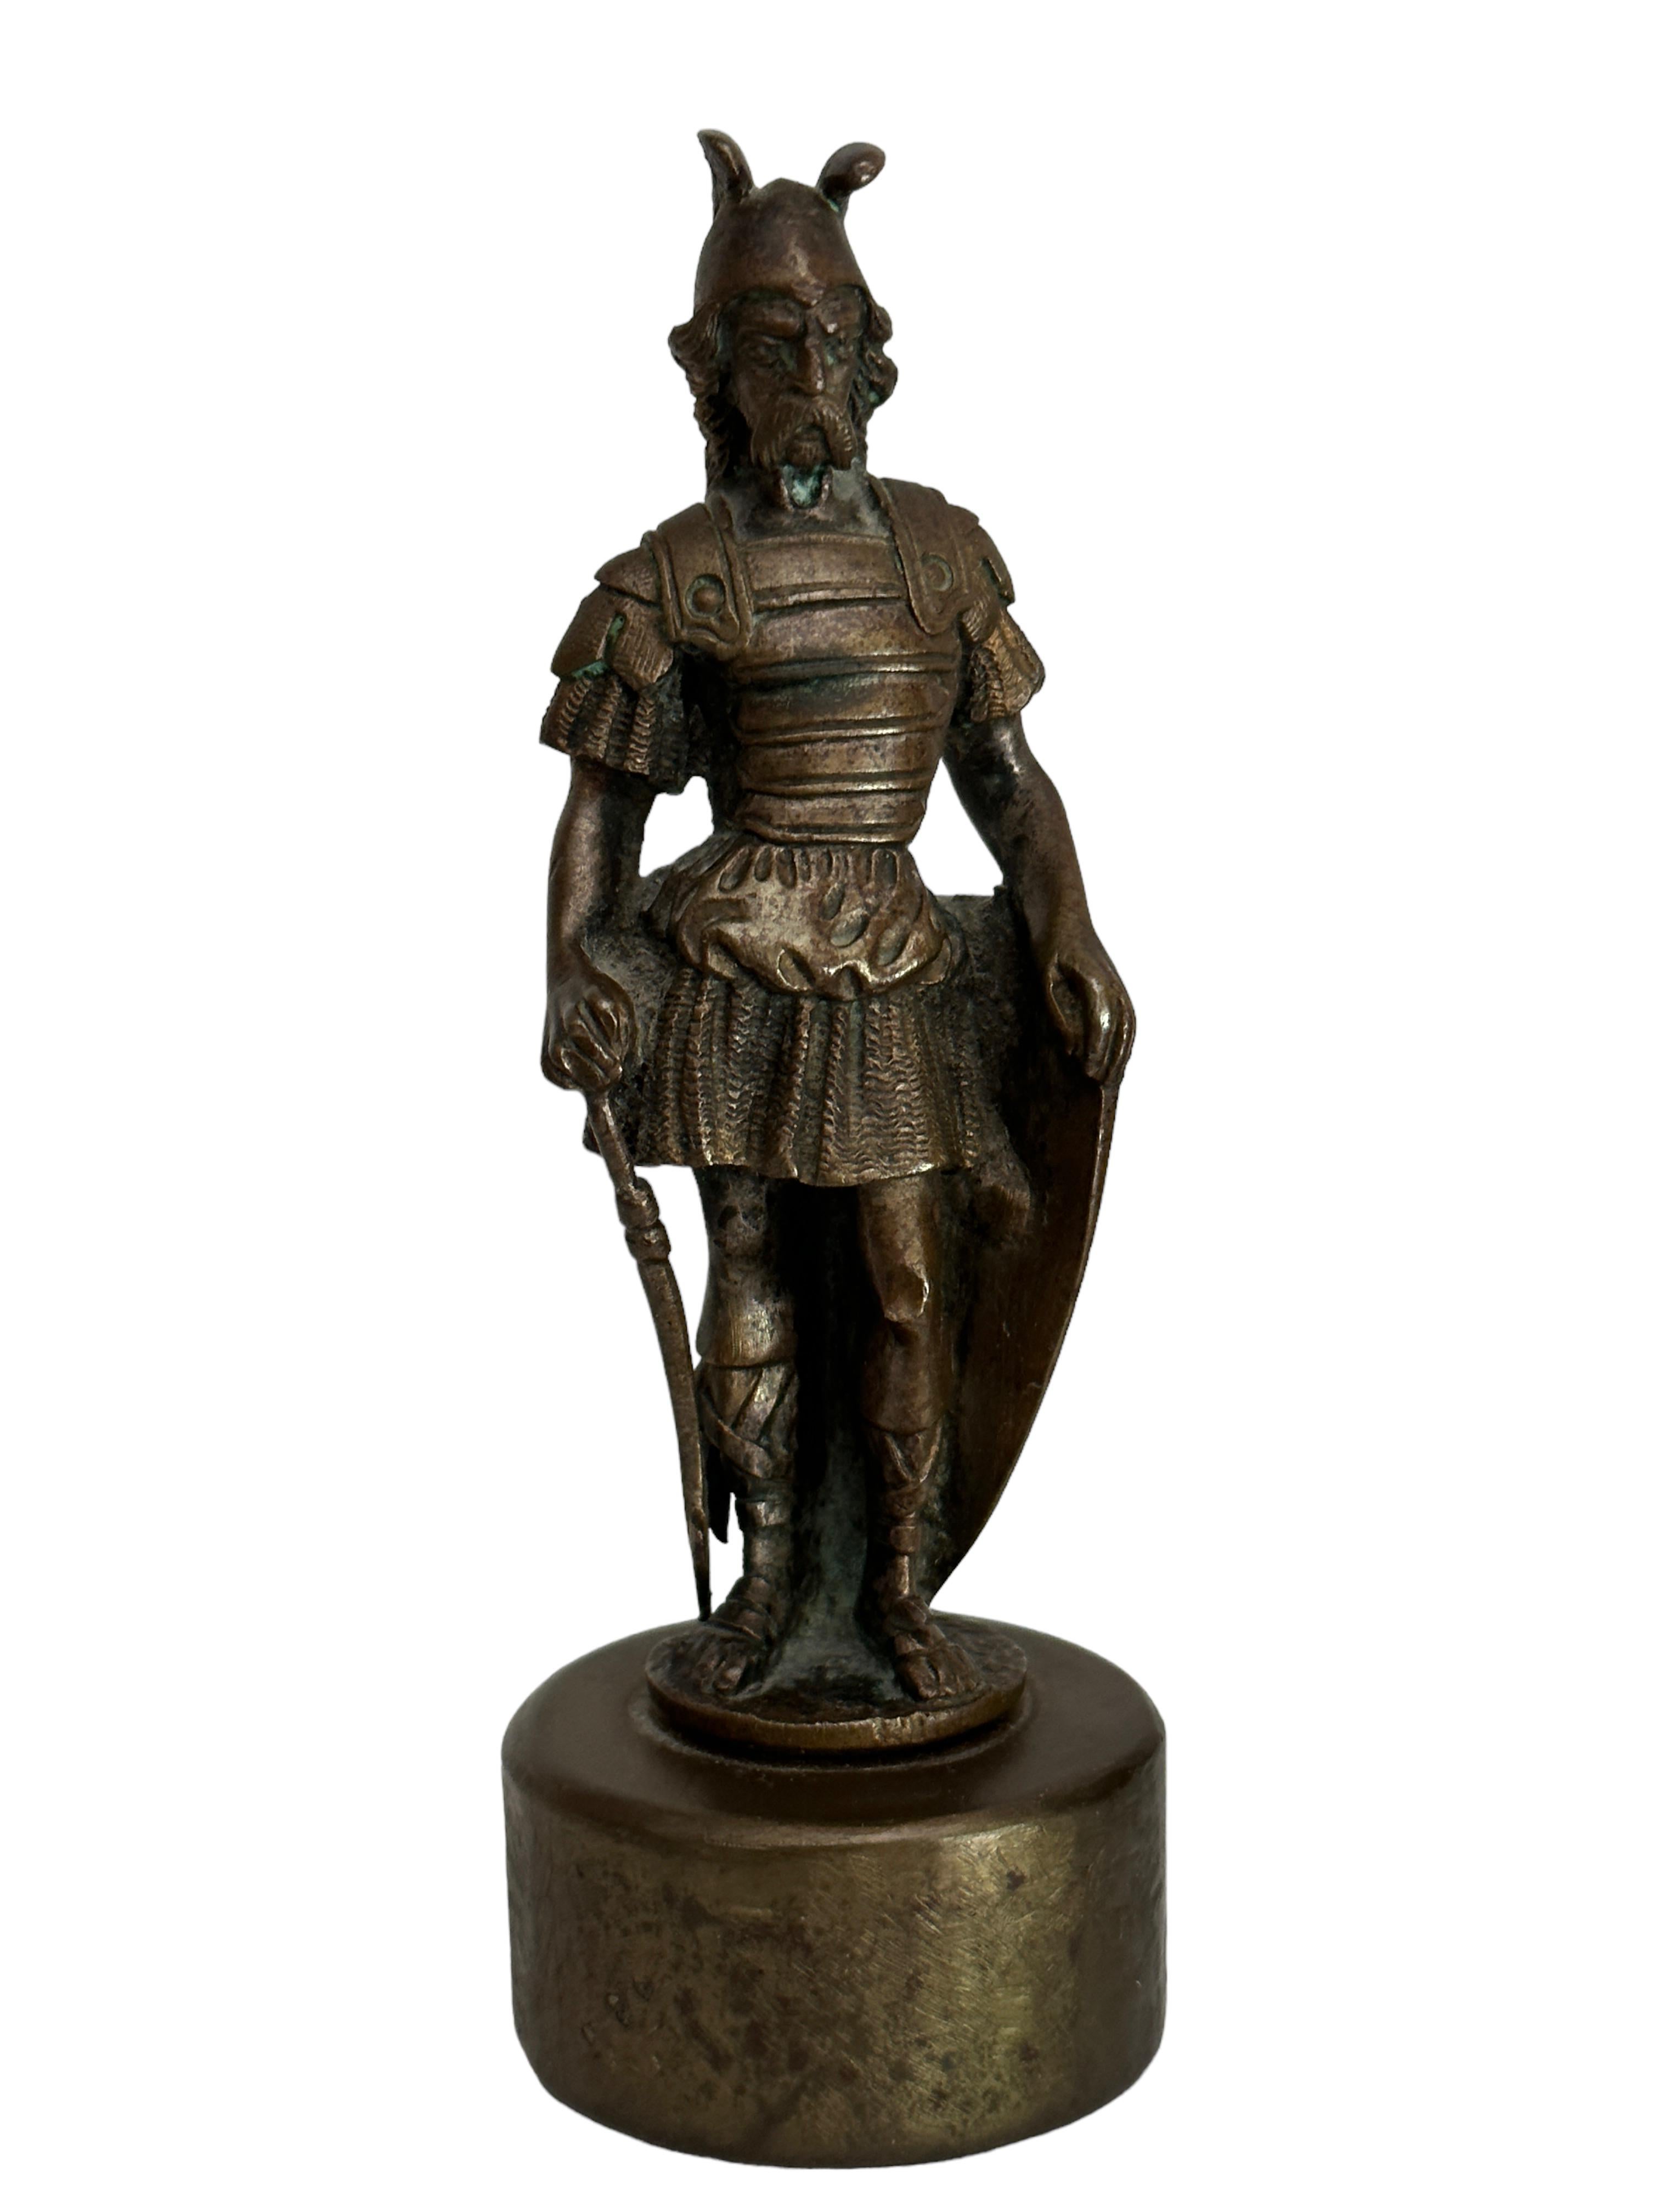 A gorgeous classic decorative Statue or Miniature Sculpture. Some wear with a nice patina, but this is old-age. Made of a kind of metal, we think it's bronze or brass. Very decorative and nice to display in your collection of miniatures or any room.